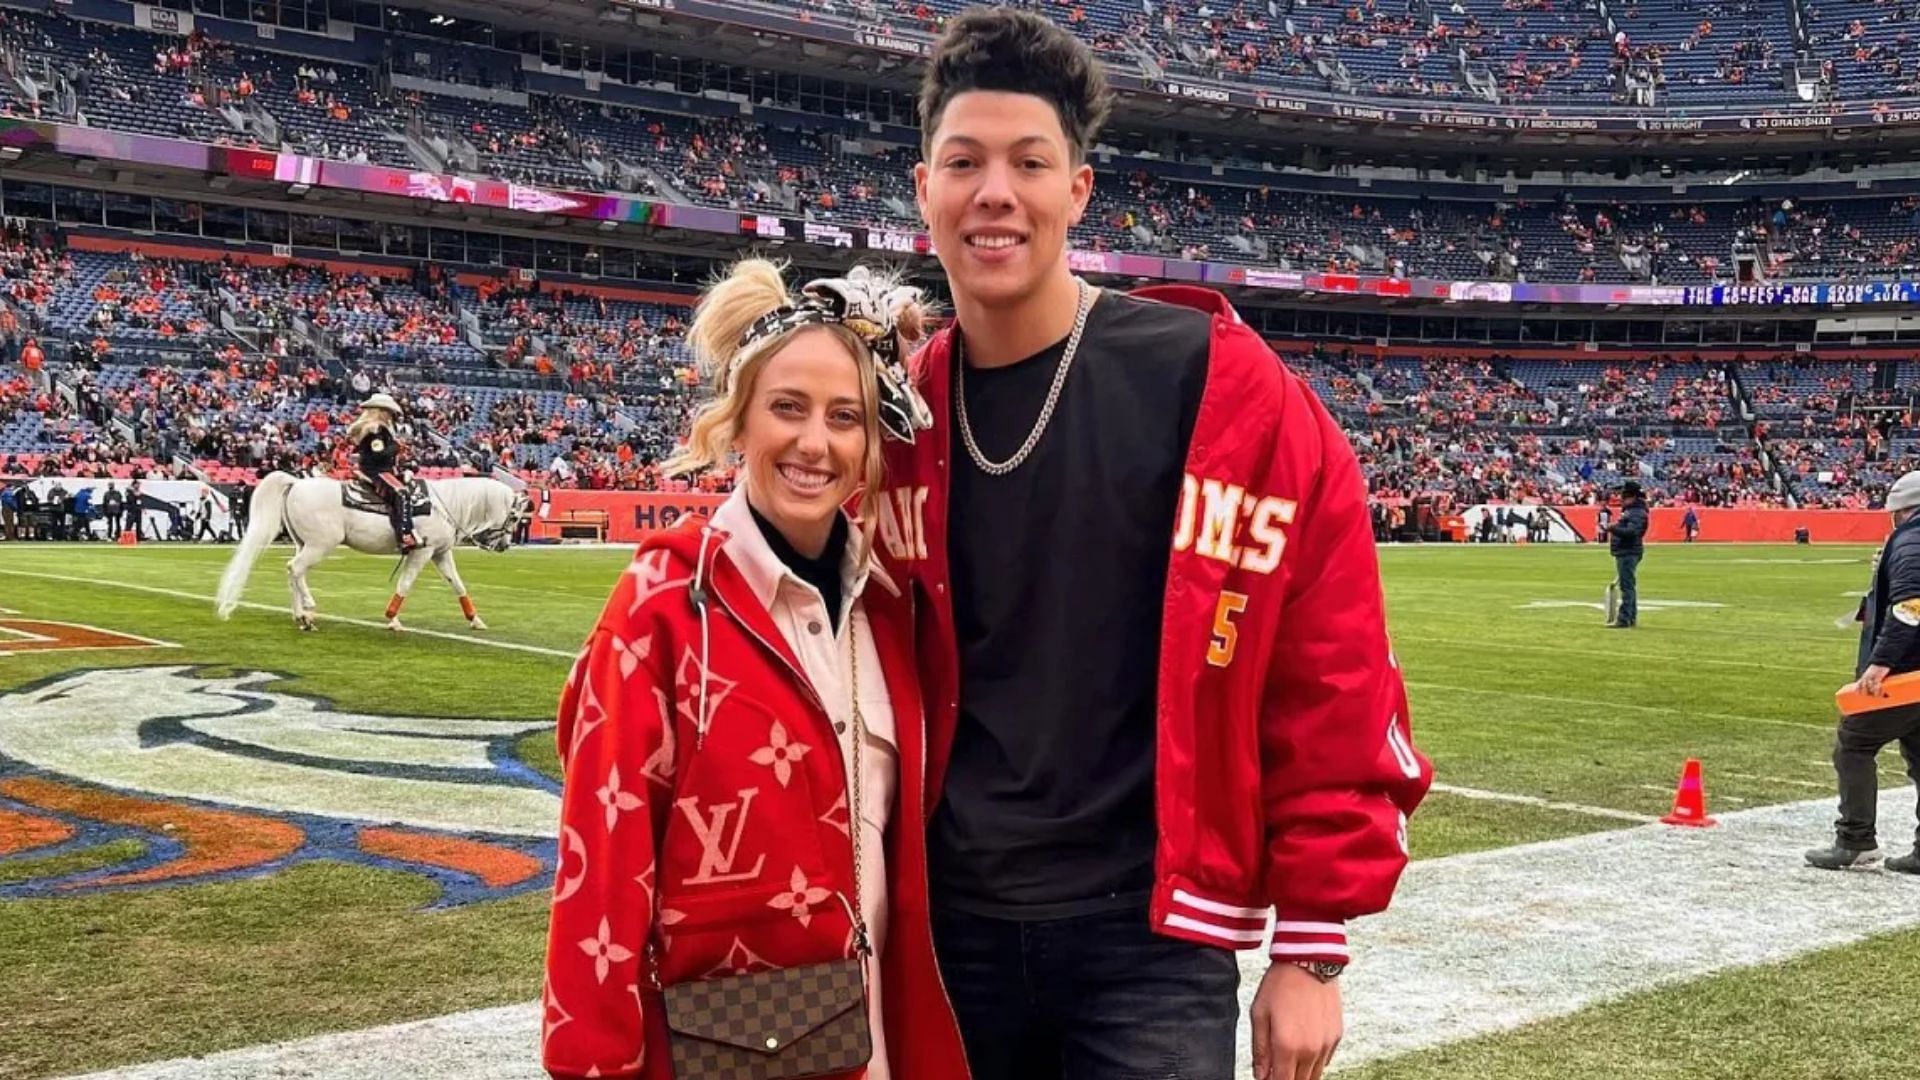 Jackson and Brittany Mahomes at Empower Field at Mile High. (Image credit: Jackson Mahomes on Instagram)